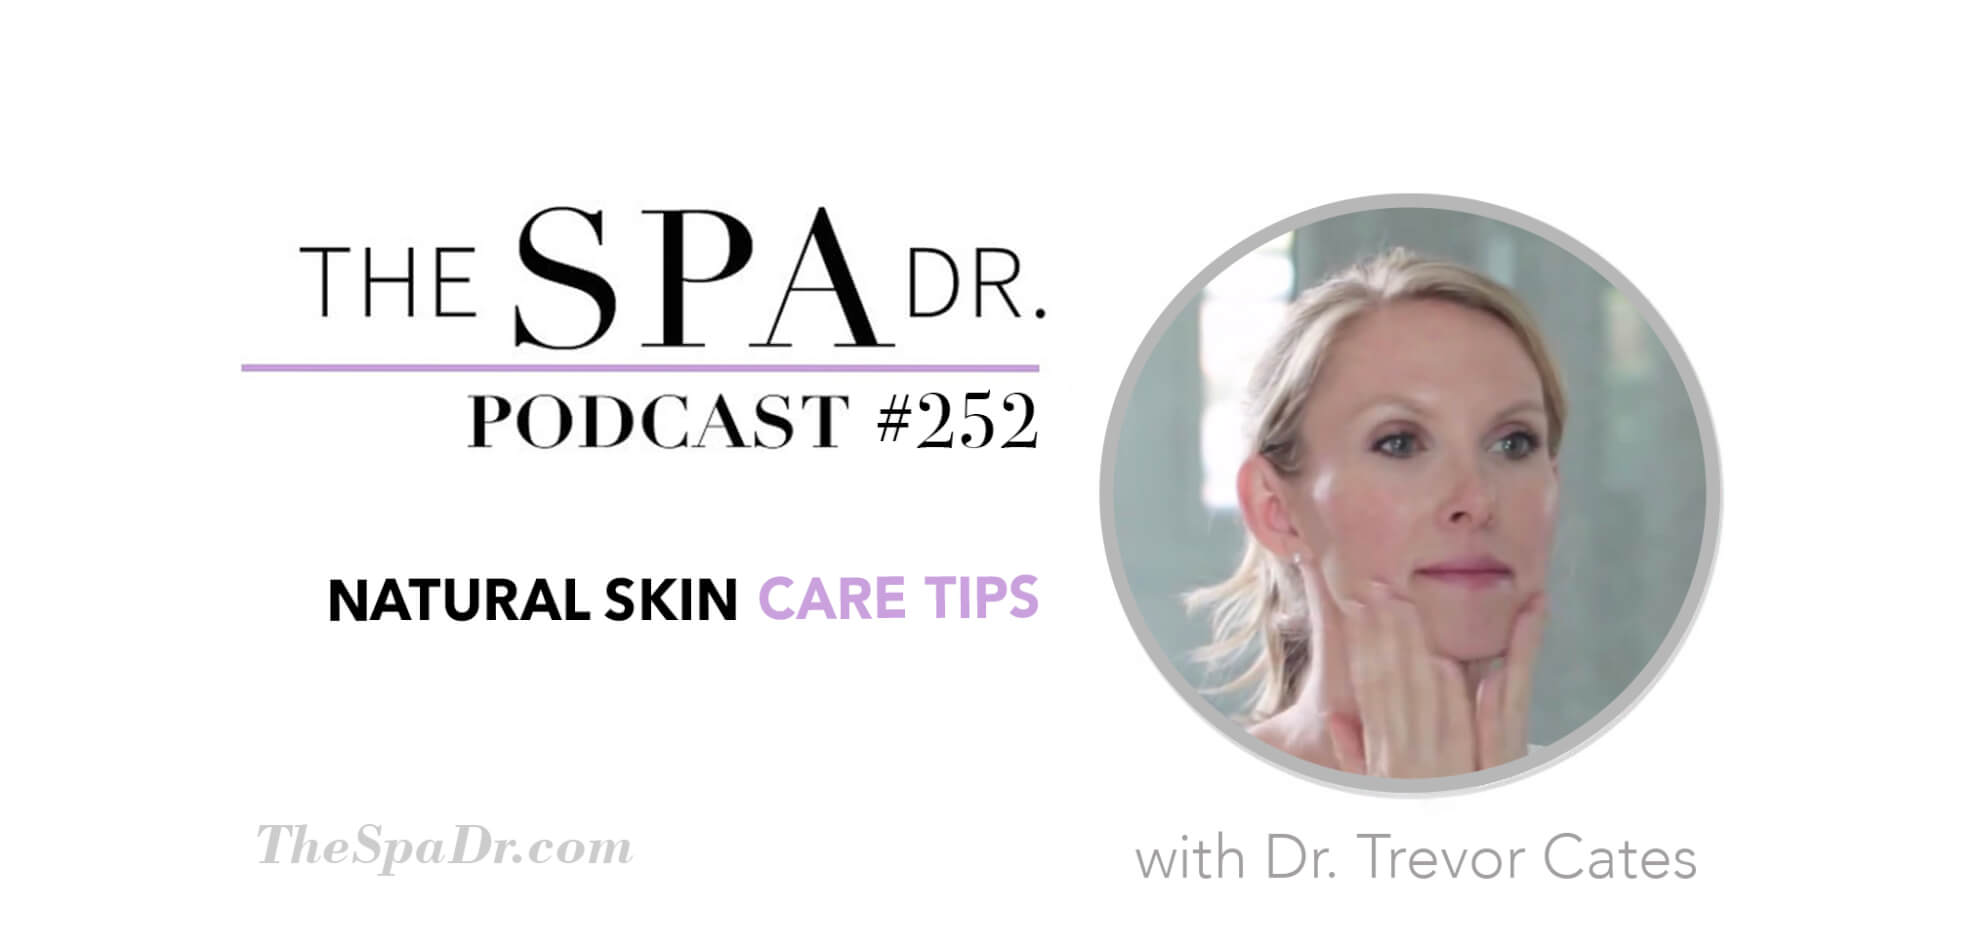 Natural Skin Care Tips with Dr. Trevor Cates